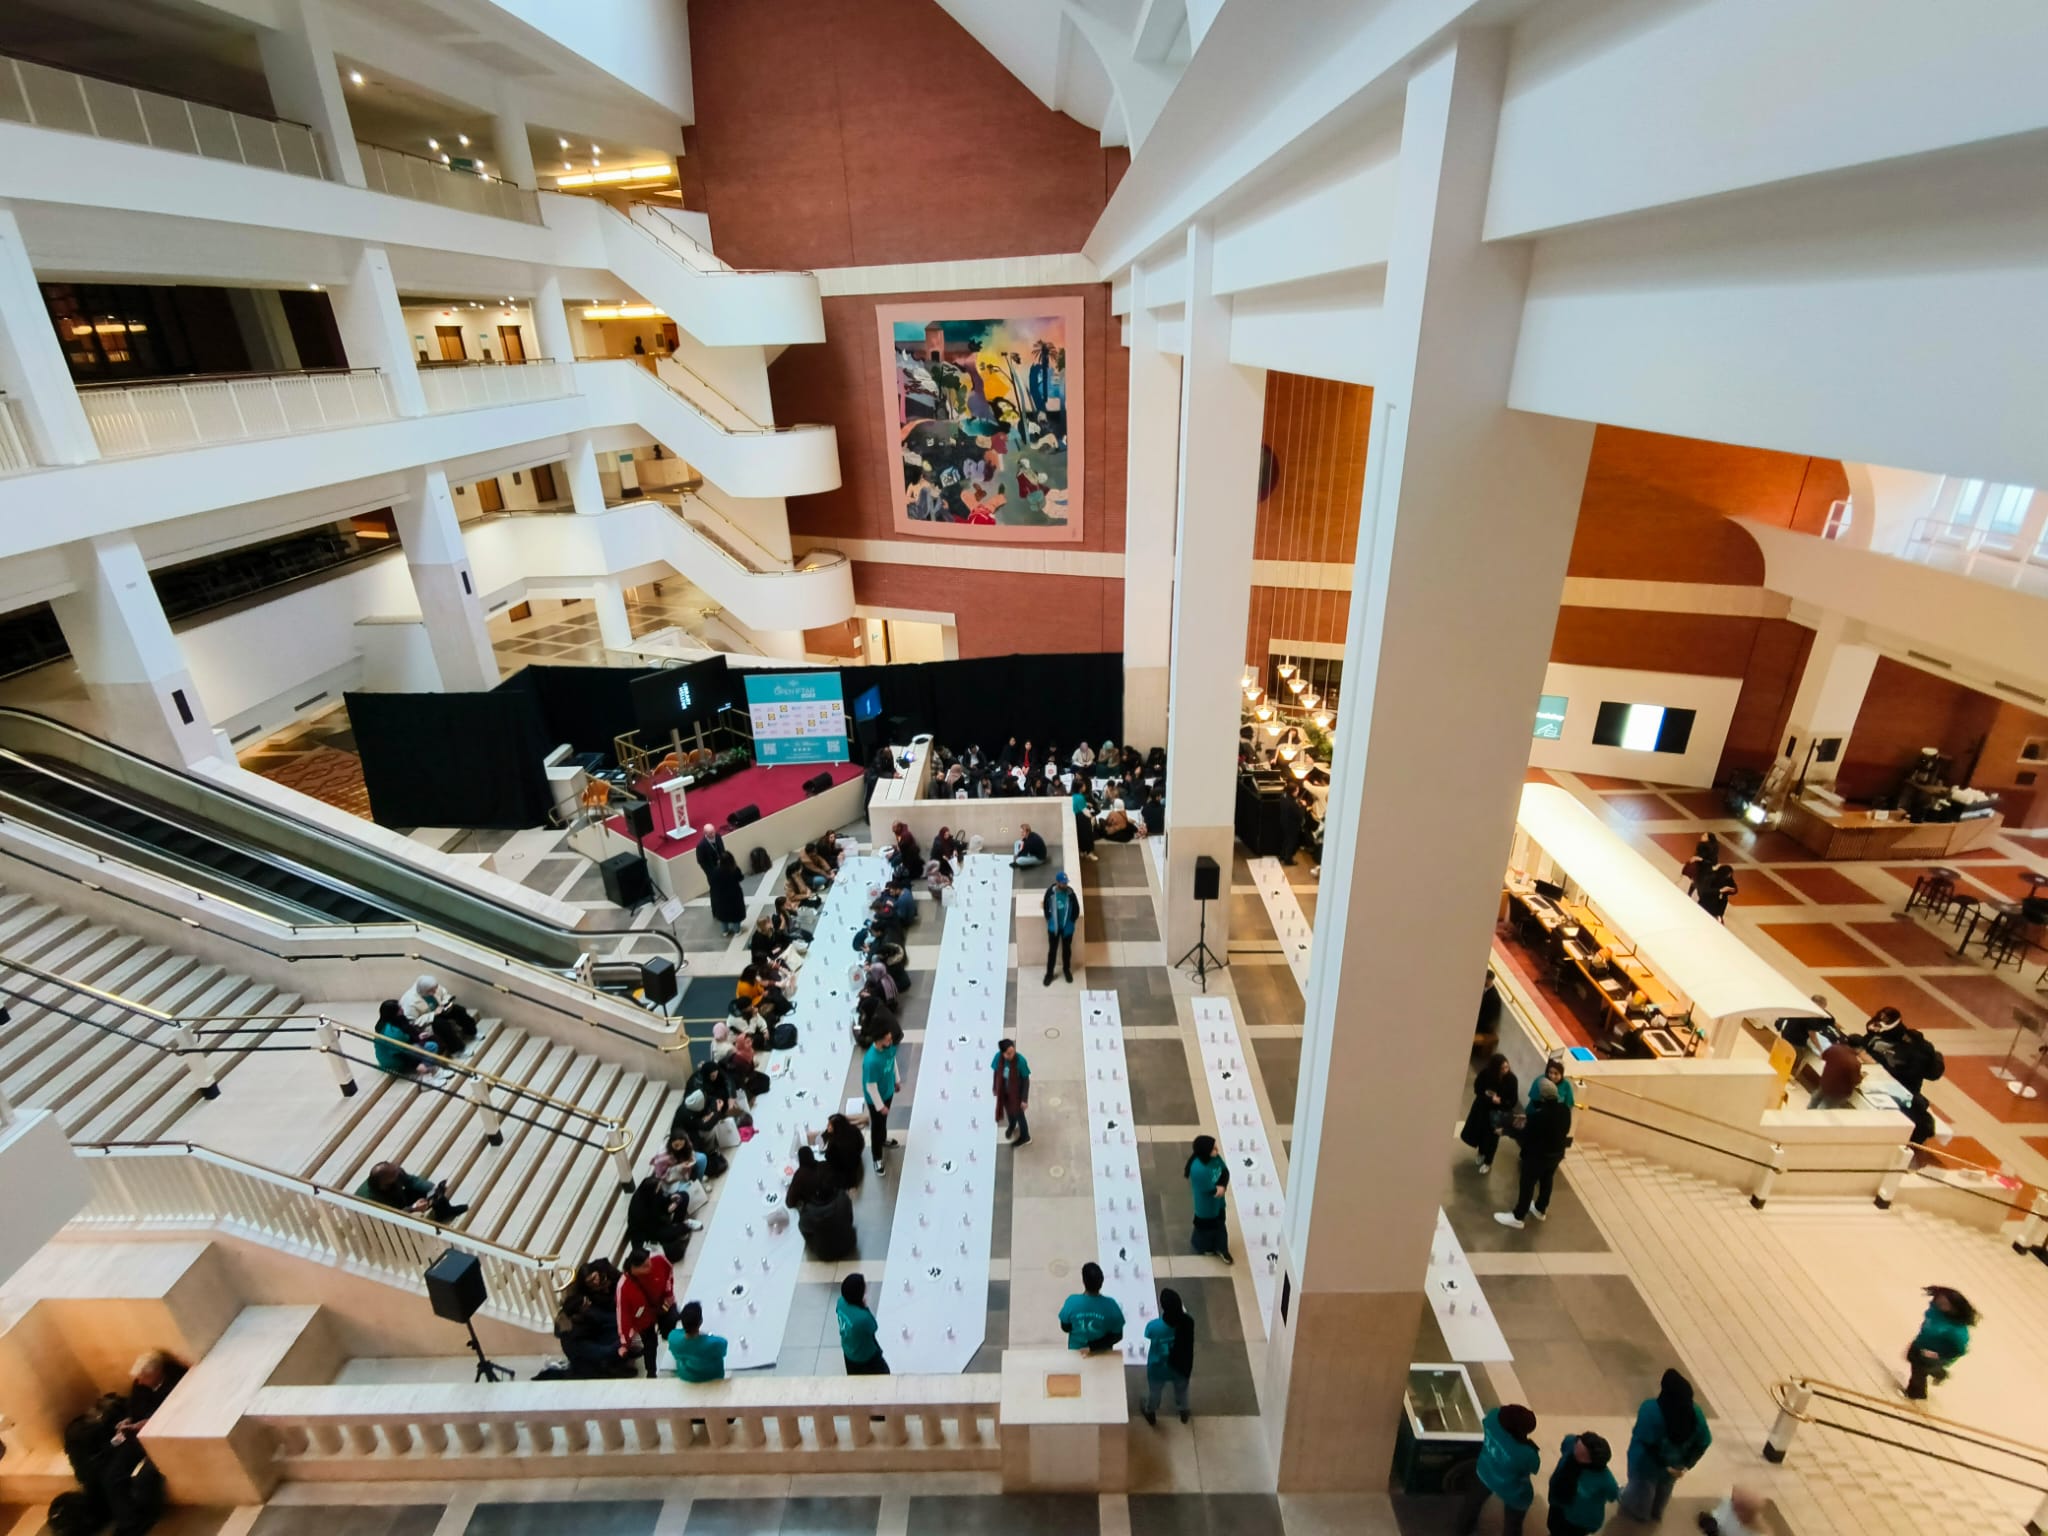 British Library Hosts Open Public Iftar - About Islam